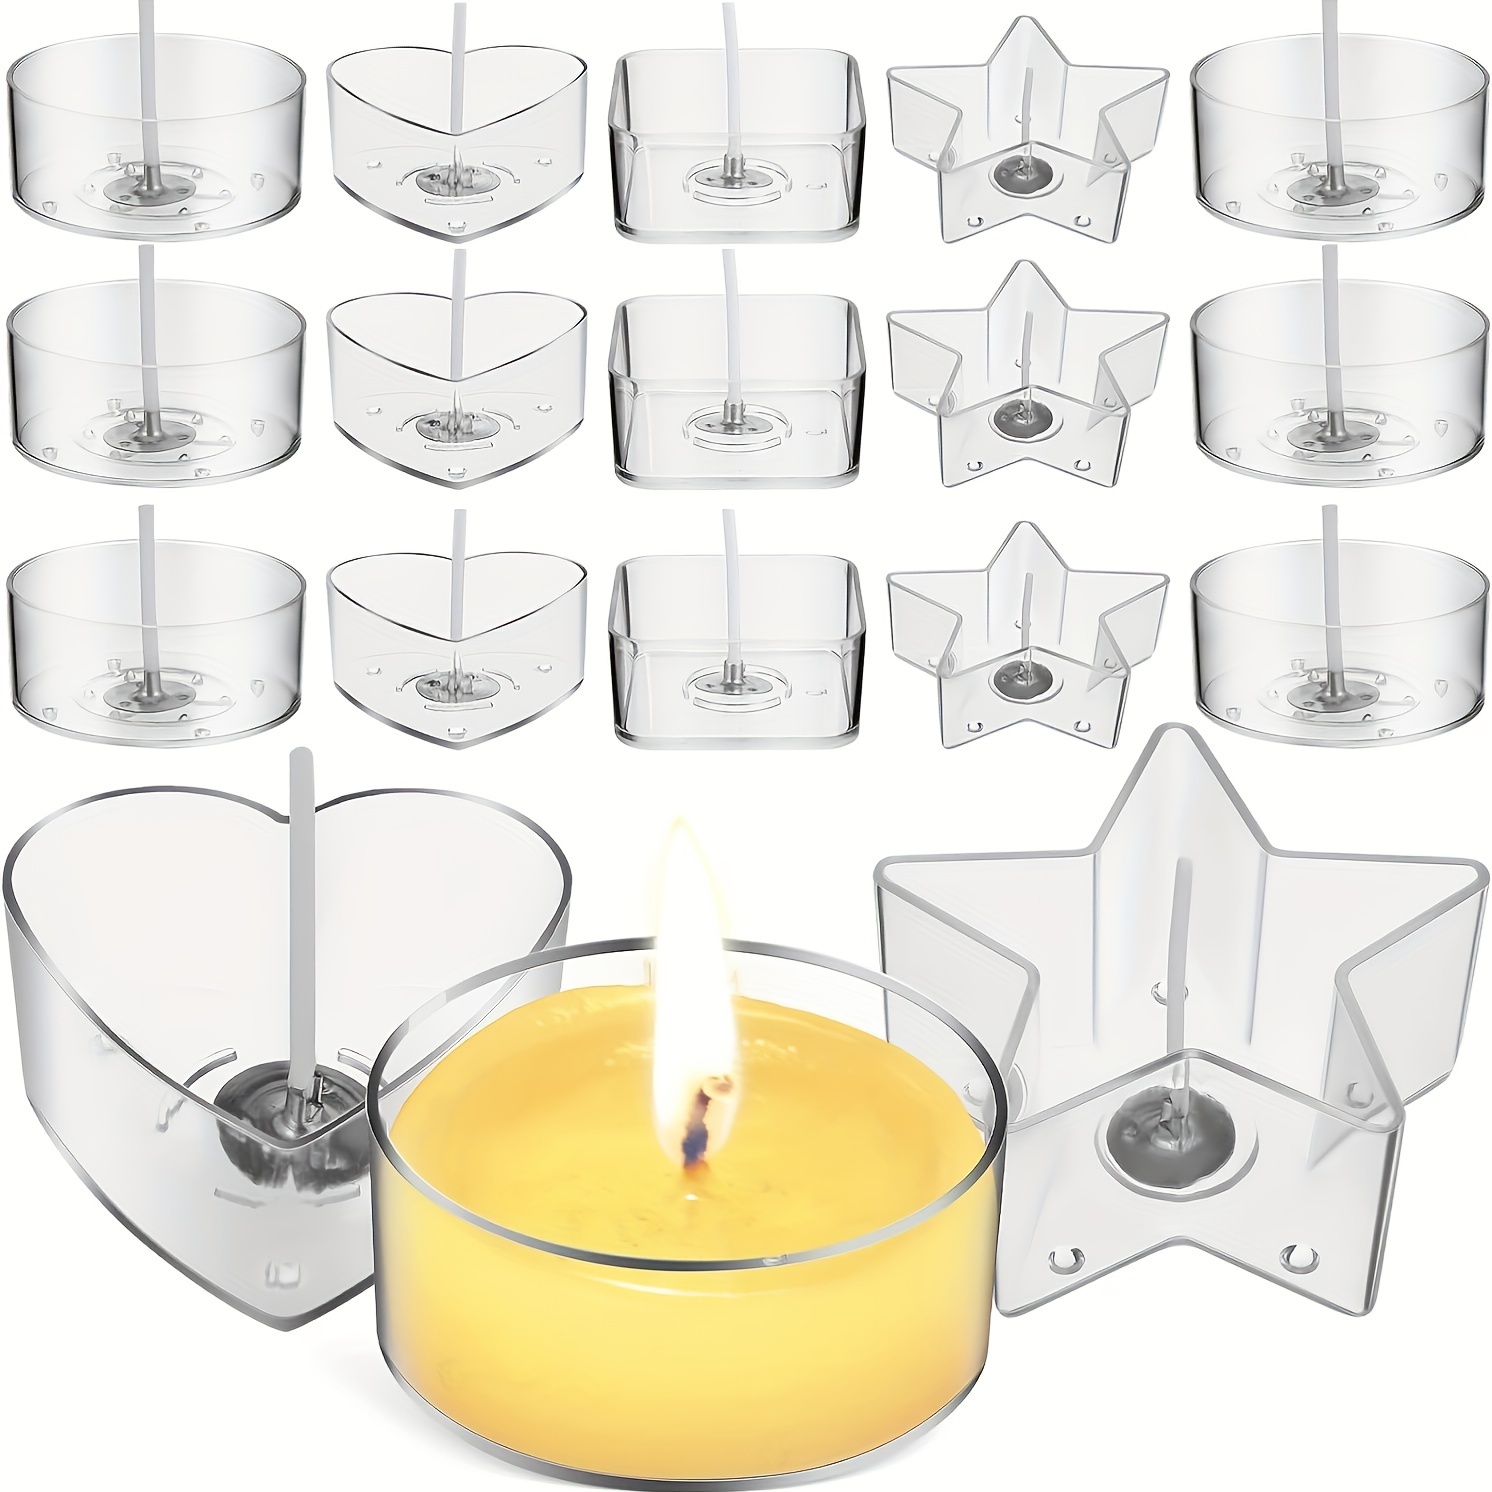 

16pcs (6 Candle Cups+10 Candle Wicks) Plastic Clear Tea Light Candle Holders, Heat-resistant Plastic Heart Square Round Shapes Tealight Cups With 26 Mm Candle Wicks For Diy Candle Making